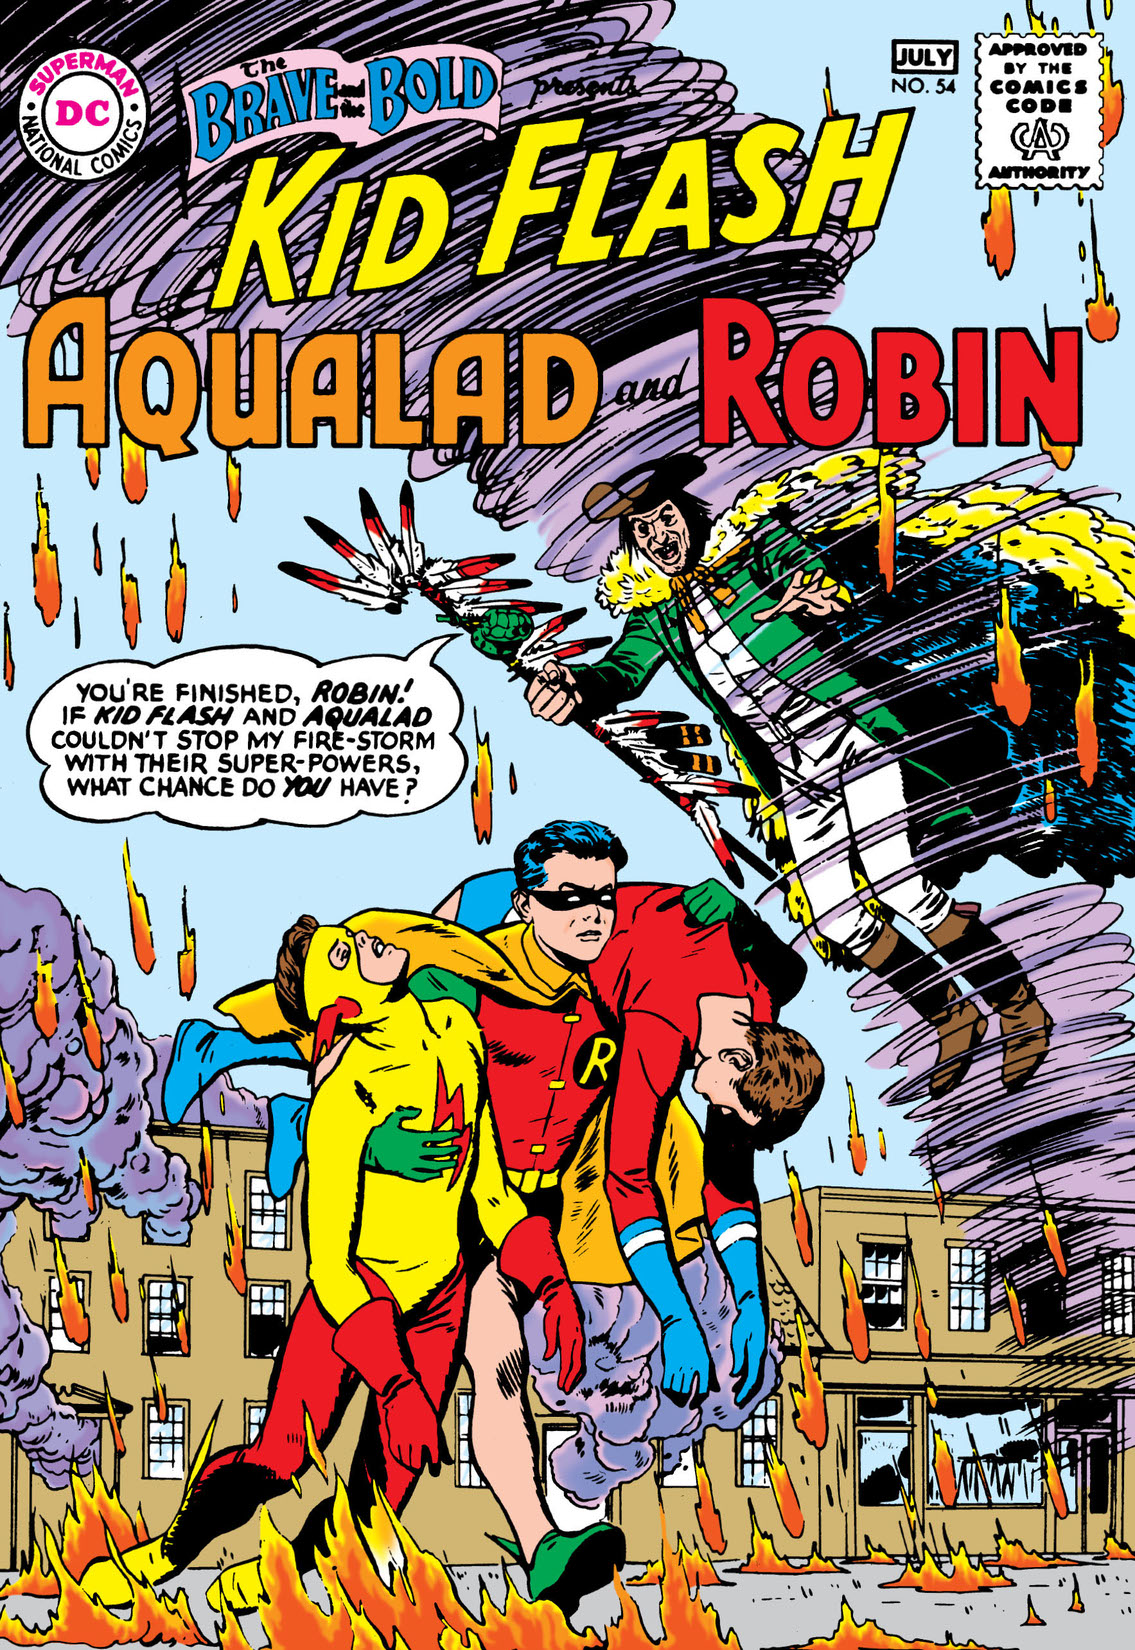 The Brave and the Bold (1955-) #54 preview images